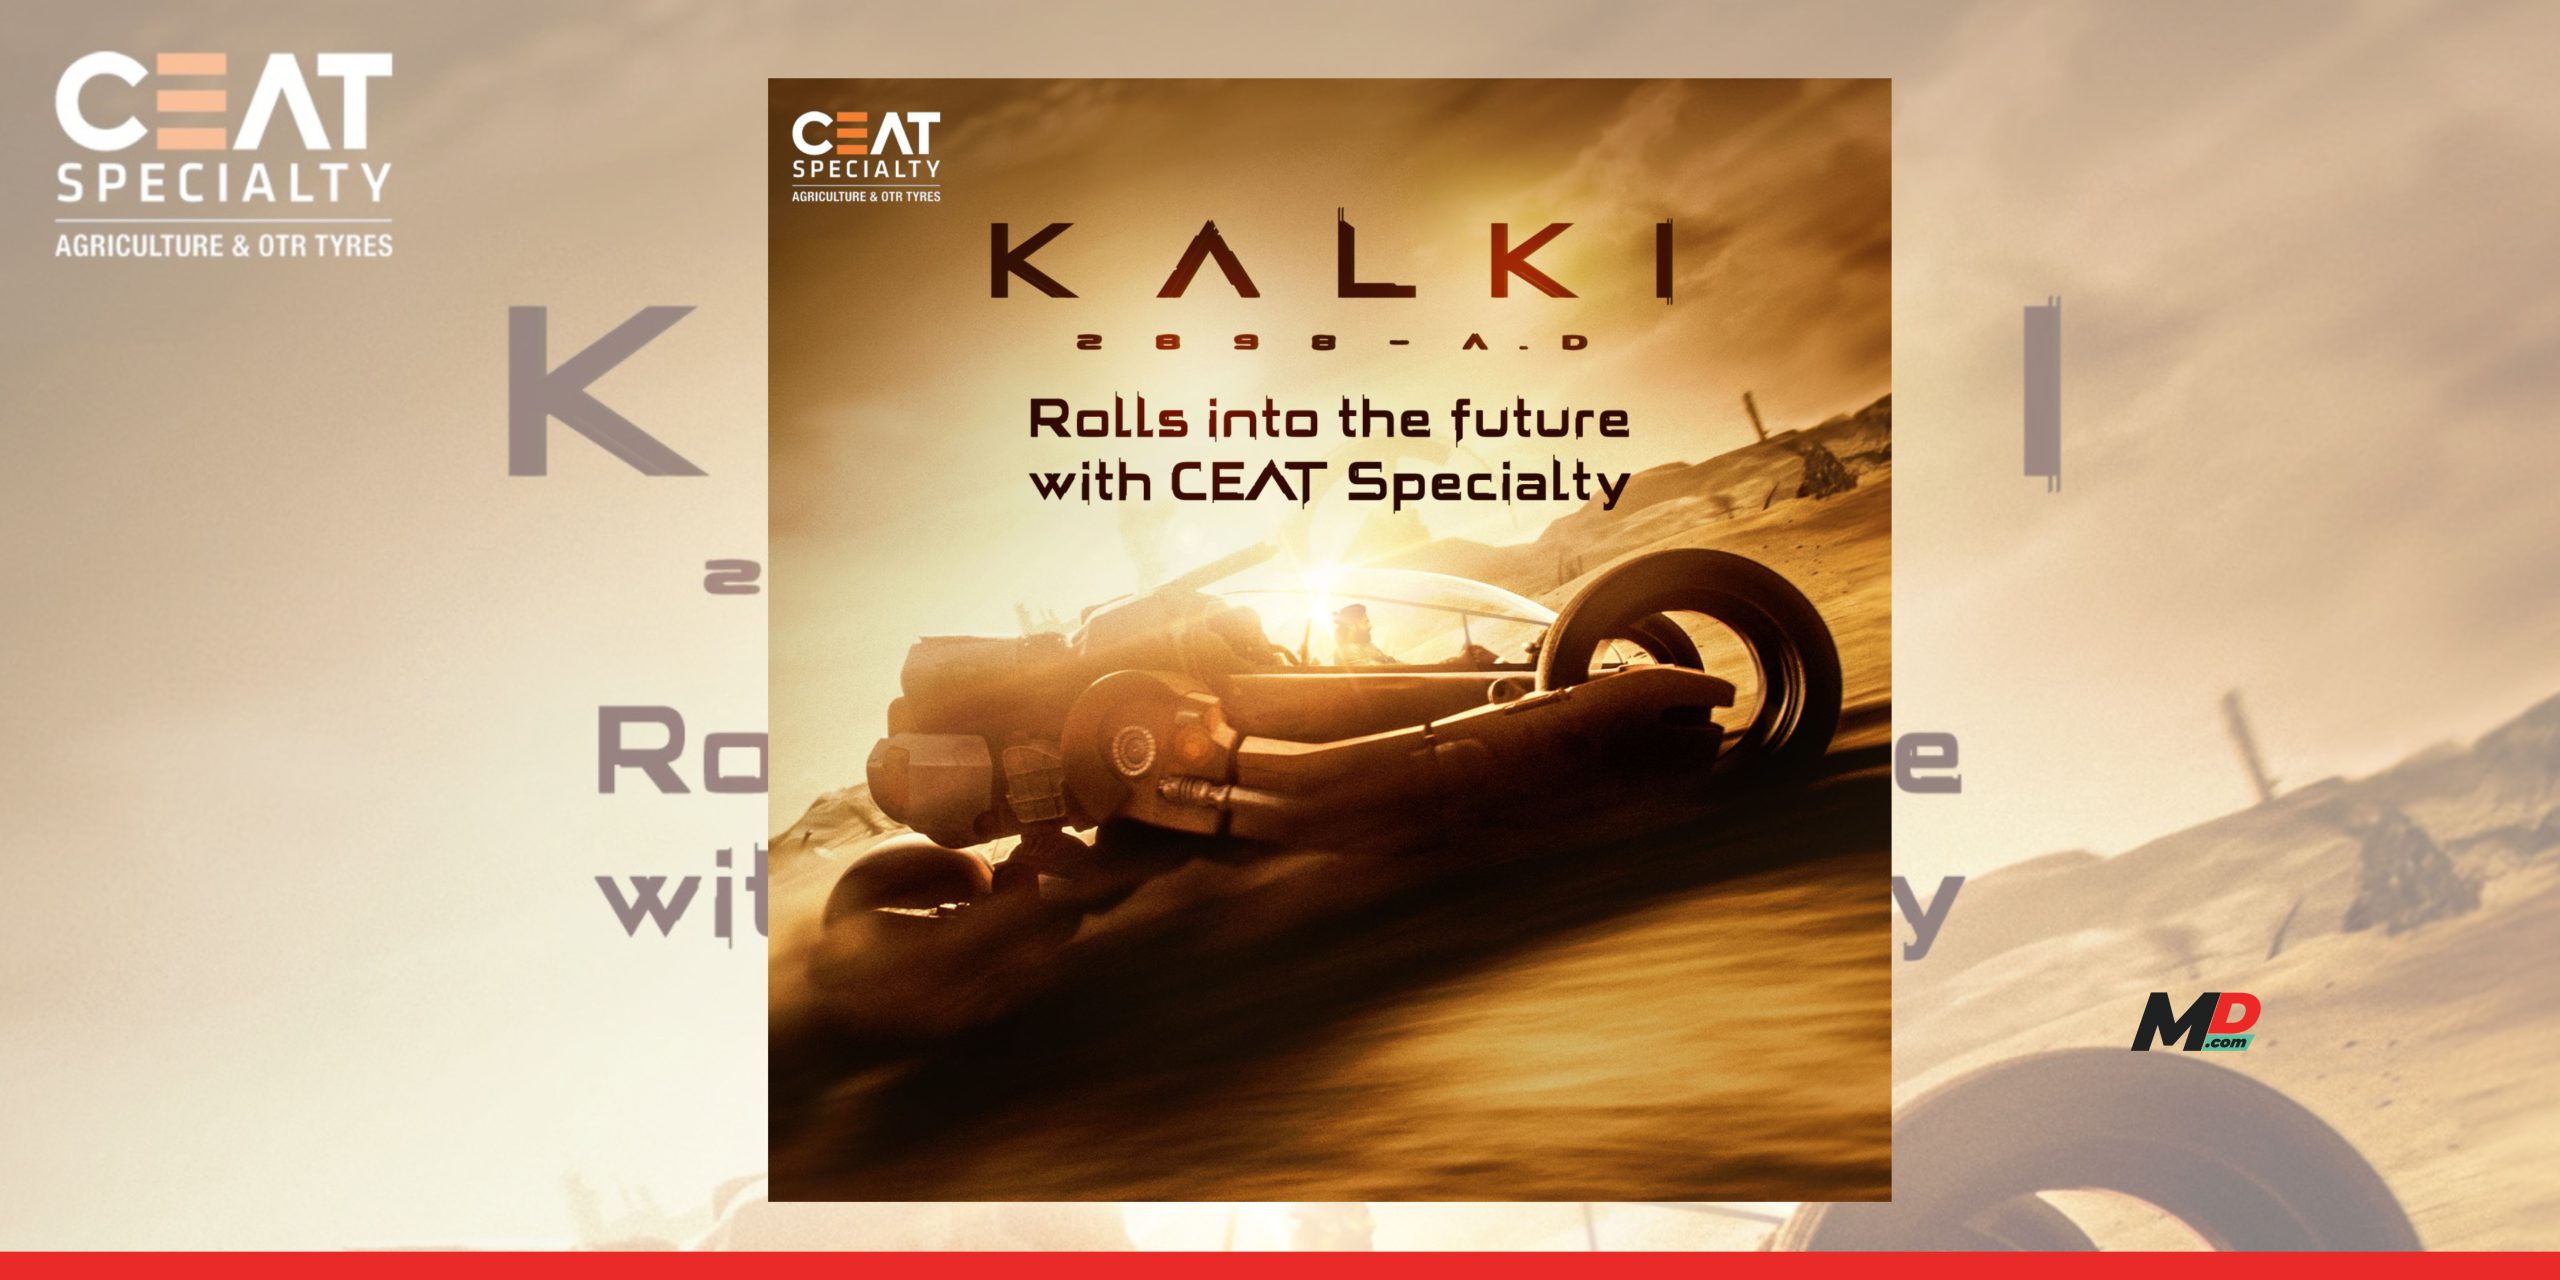 CEAT Specialty Collaborates with Kalki 2898 AD for the Launch of Futuristic Tyres for AI Vehicle